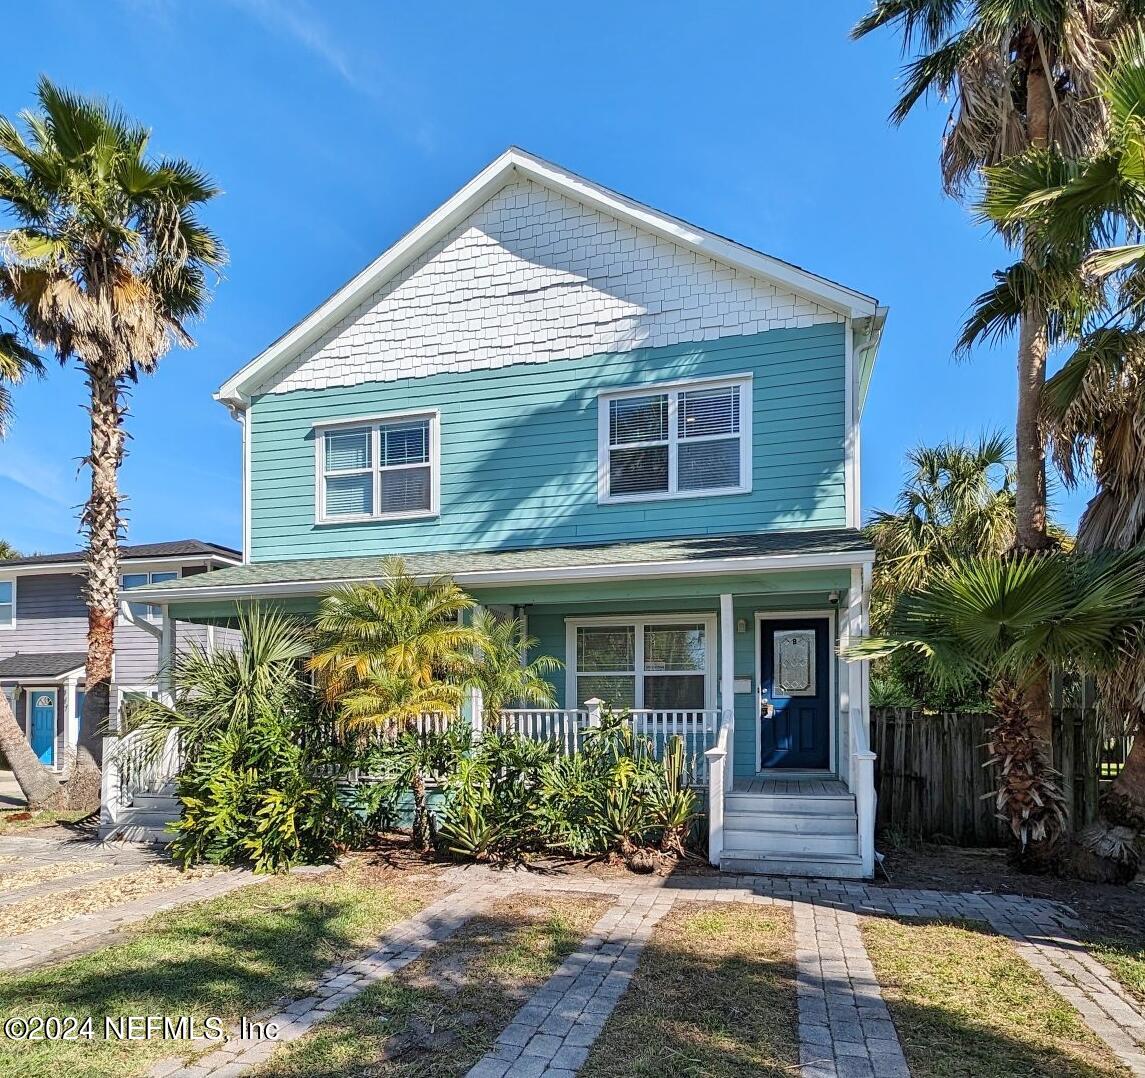 Jacksonville Beach, FL home for sale located at 411 3rd Avenue S Unit B, Jacksonville Beach, FL 32250